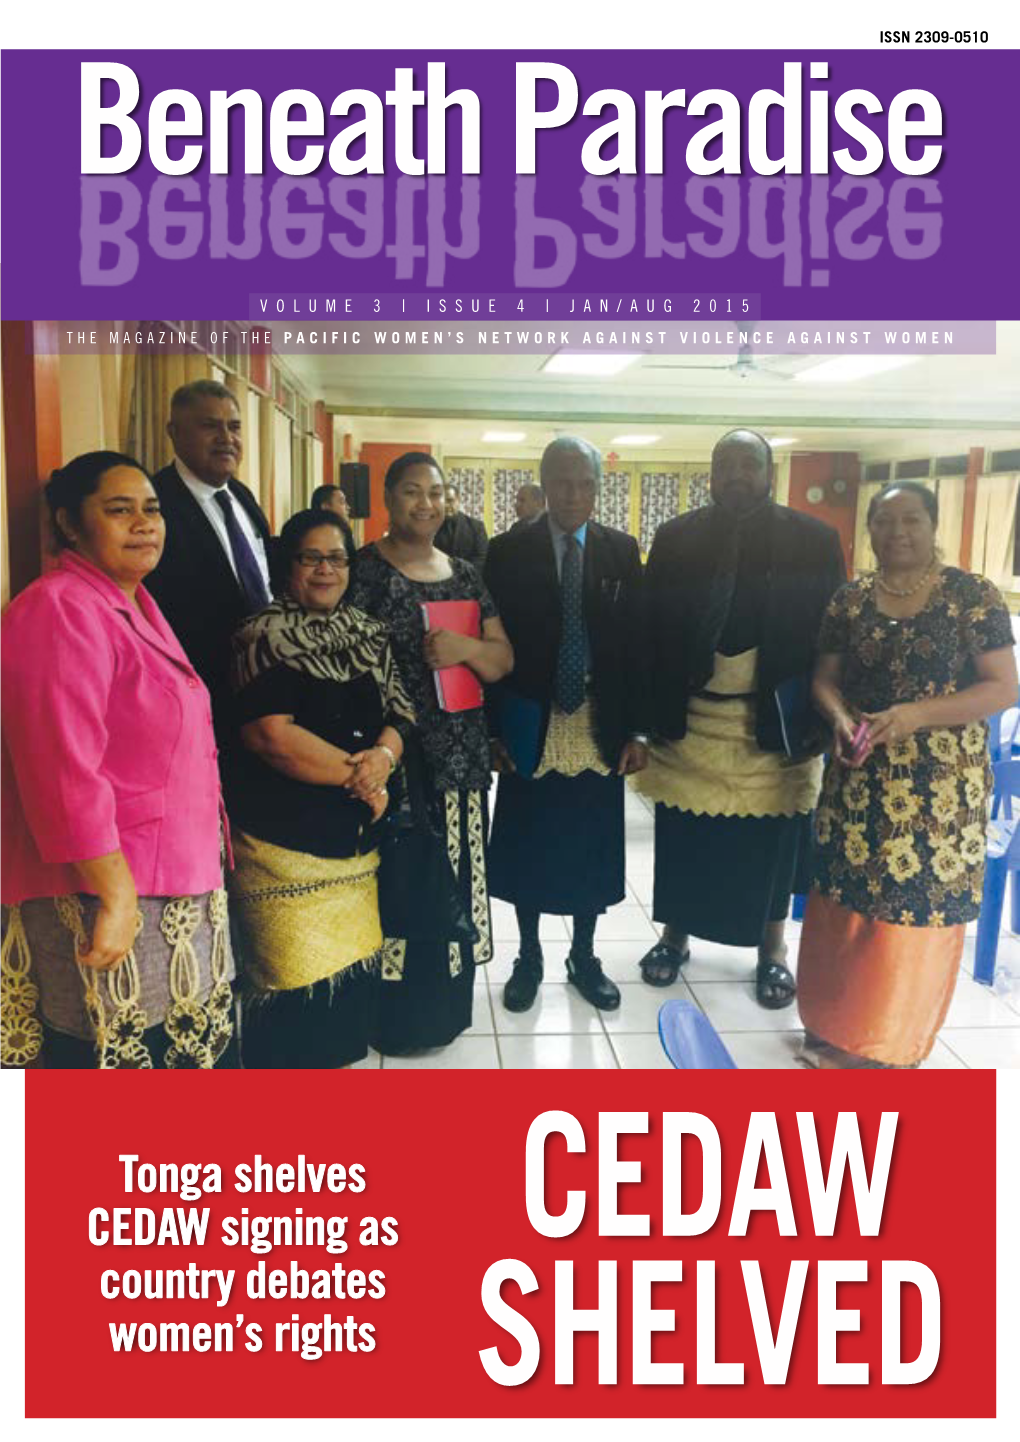 Tonga Shelves CEDAW Signing As Country Debates Women's Rights